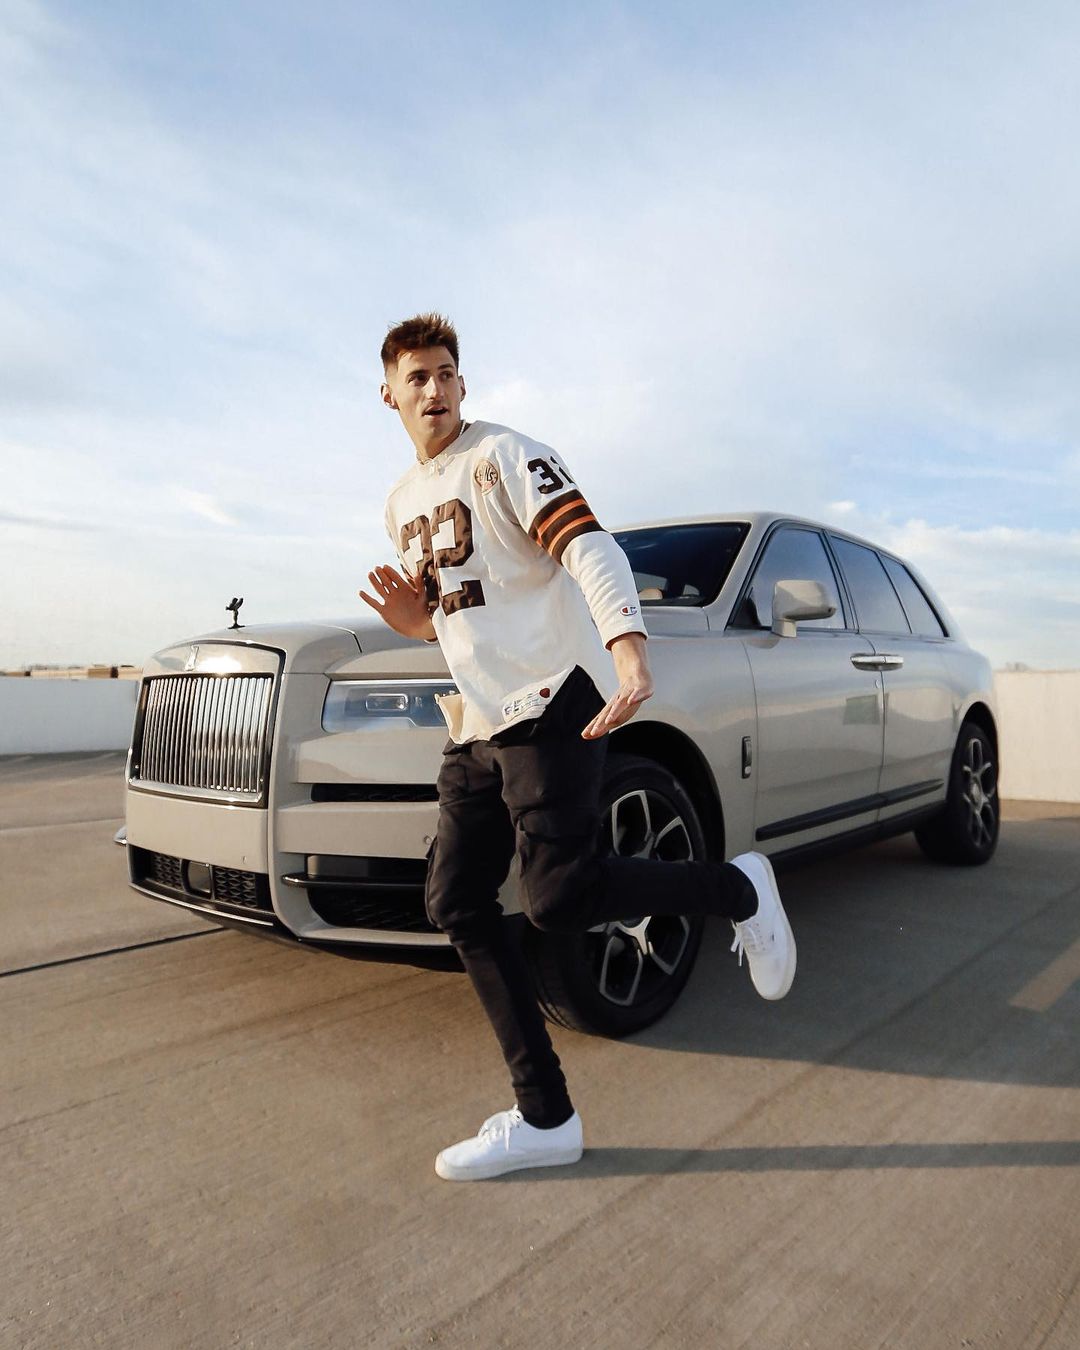 Mark Dohnerのインスタグラム：「just dropped $500k on my dream car!! ⭐️ 2020 Rolls-Royce Cullinan Black Badge... jk @rollsroycecle lemme borrow it cuz of my new song! #FAMOUS (what’s your dream car?) 🚘」